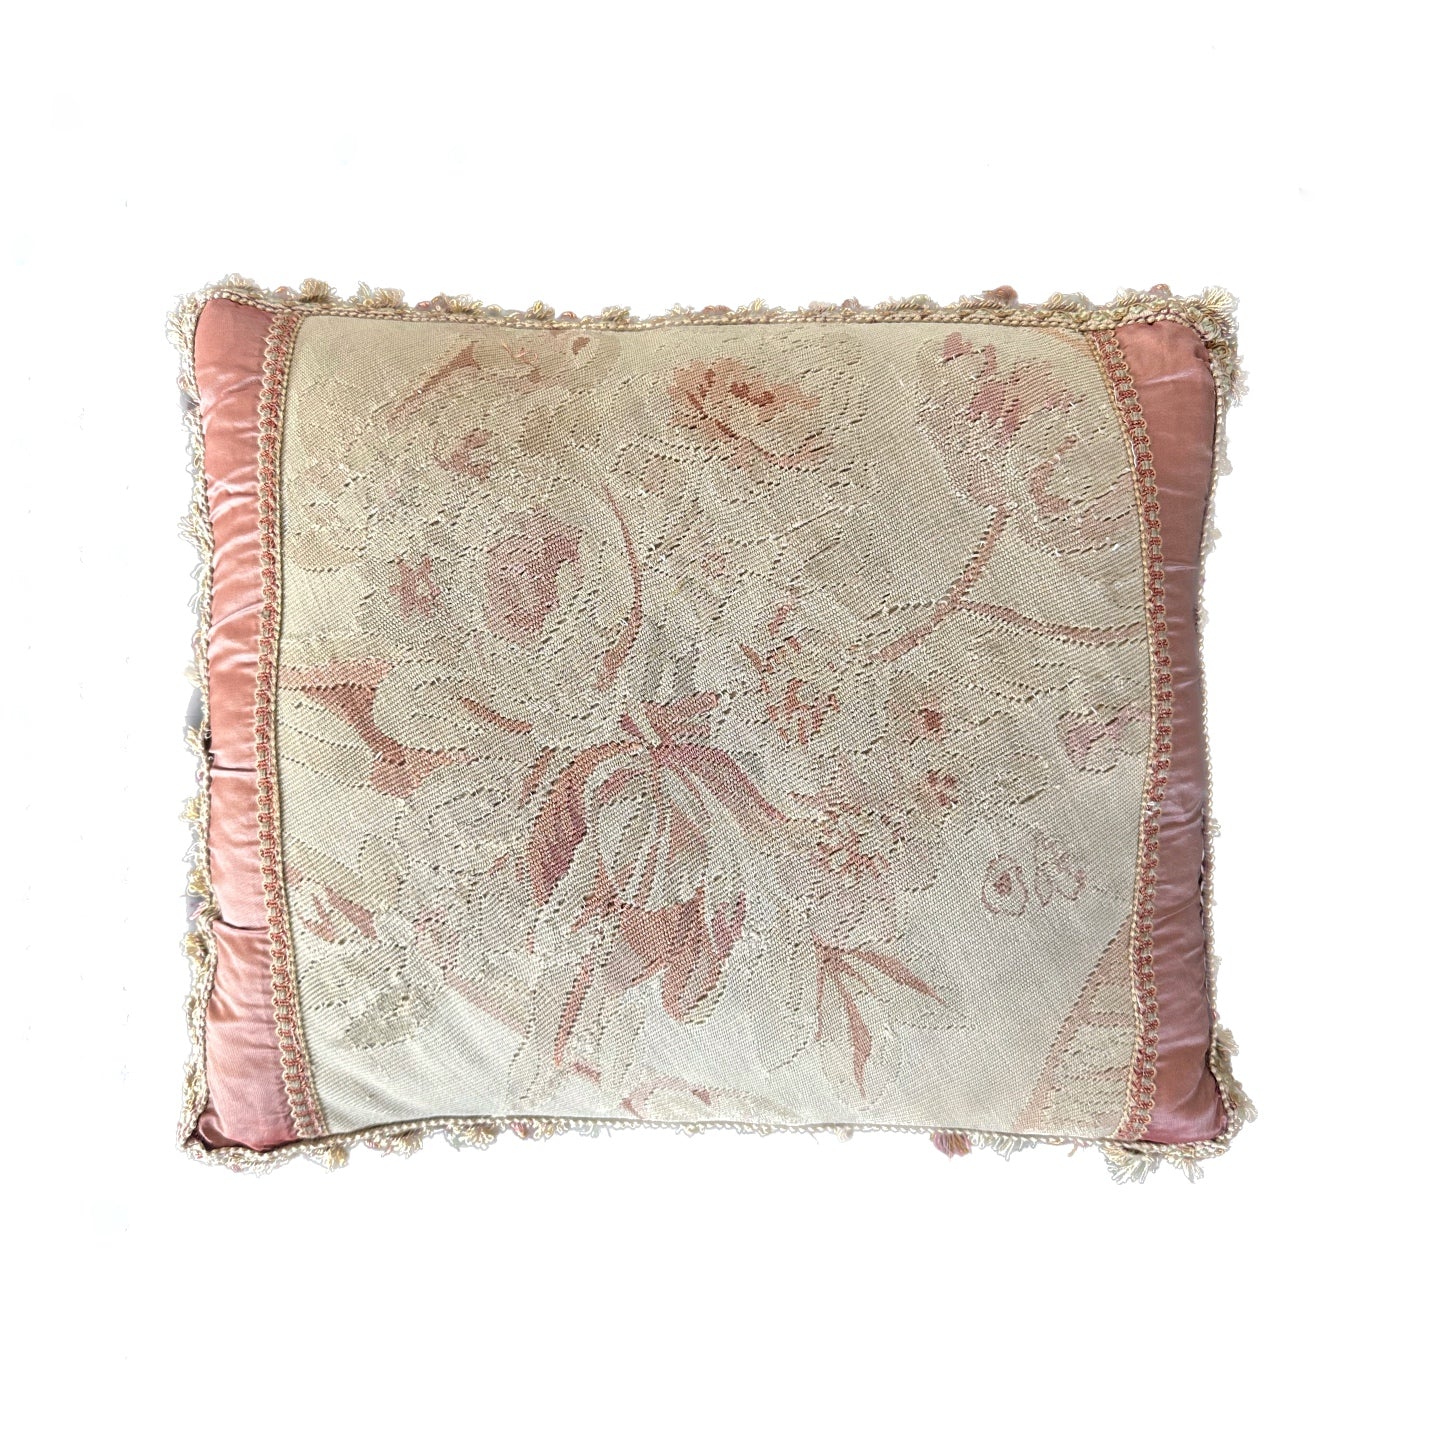 24" x 24" Peach Pink Floral Vintage French Aubusson Silk Pillow Case